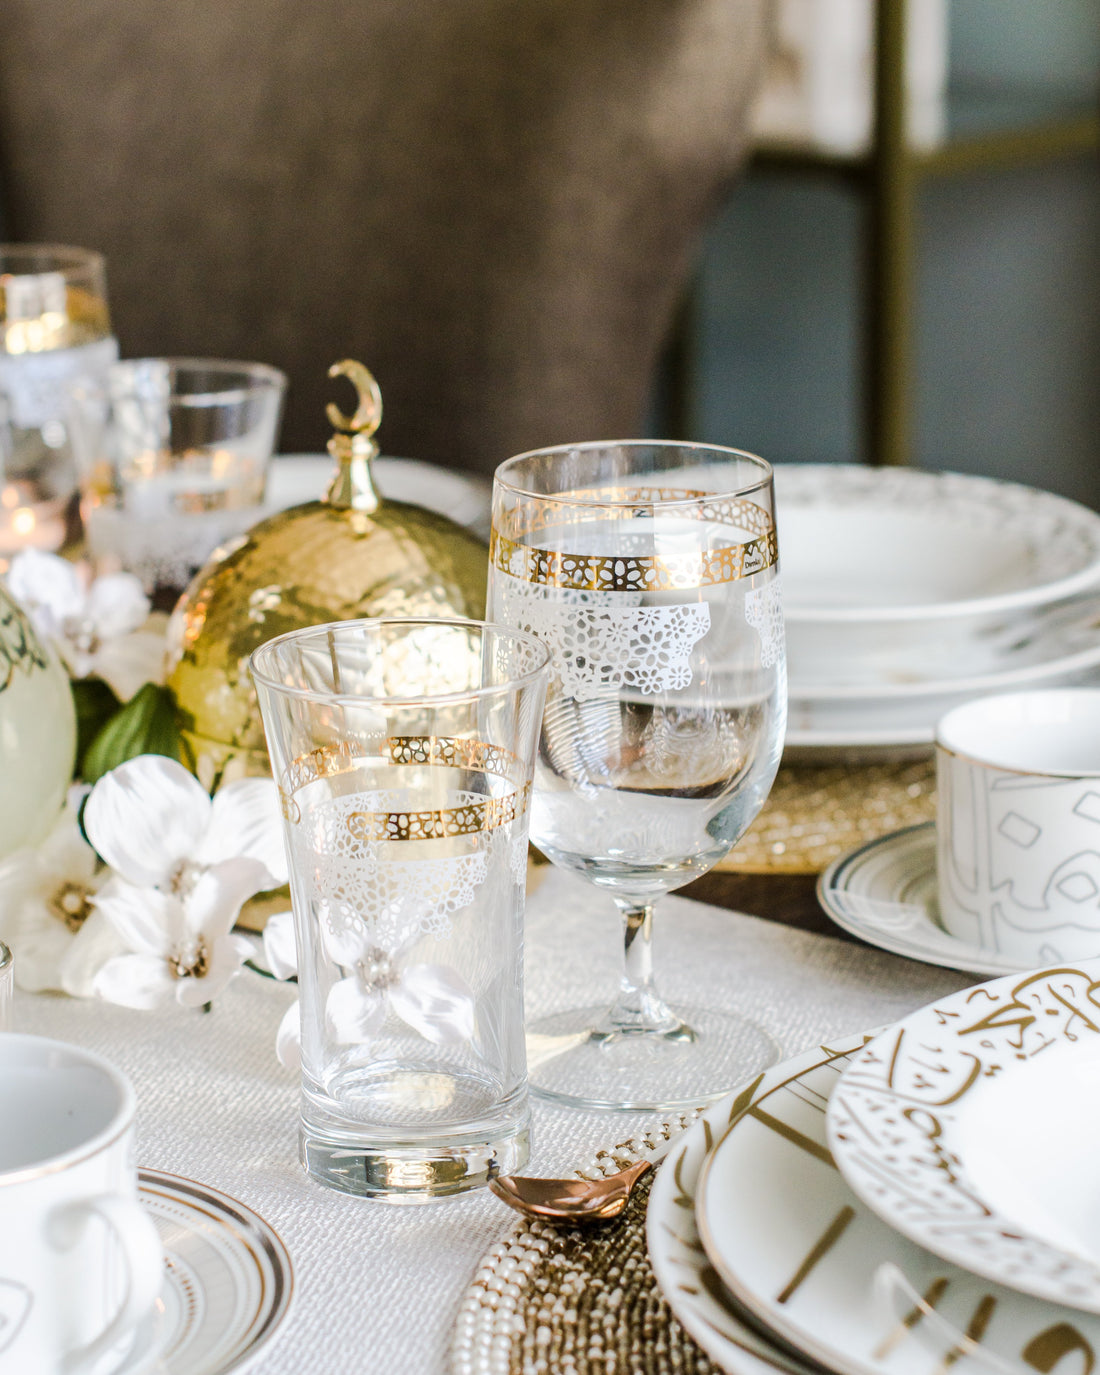 Lilac drinkware with golden and white design  placed on dining table